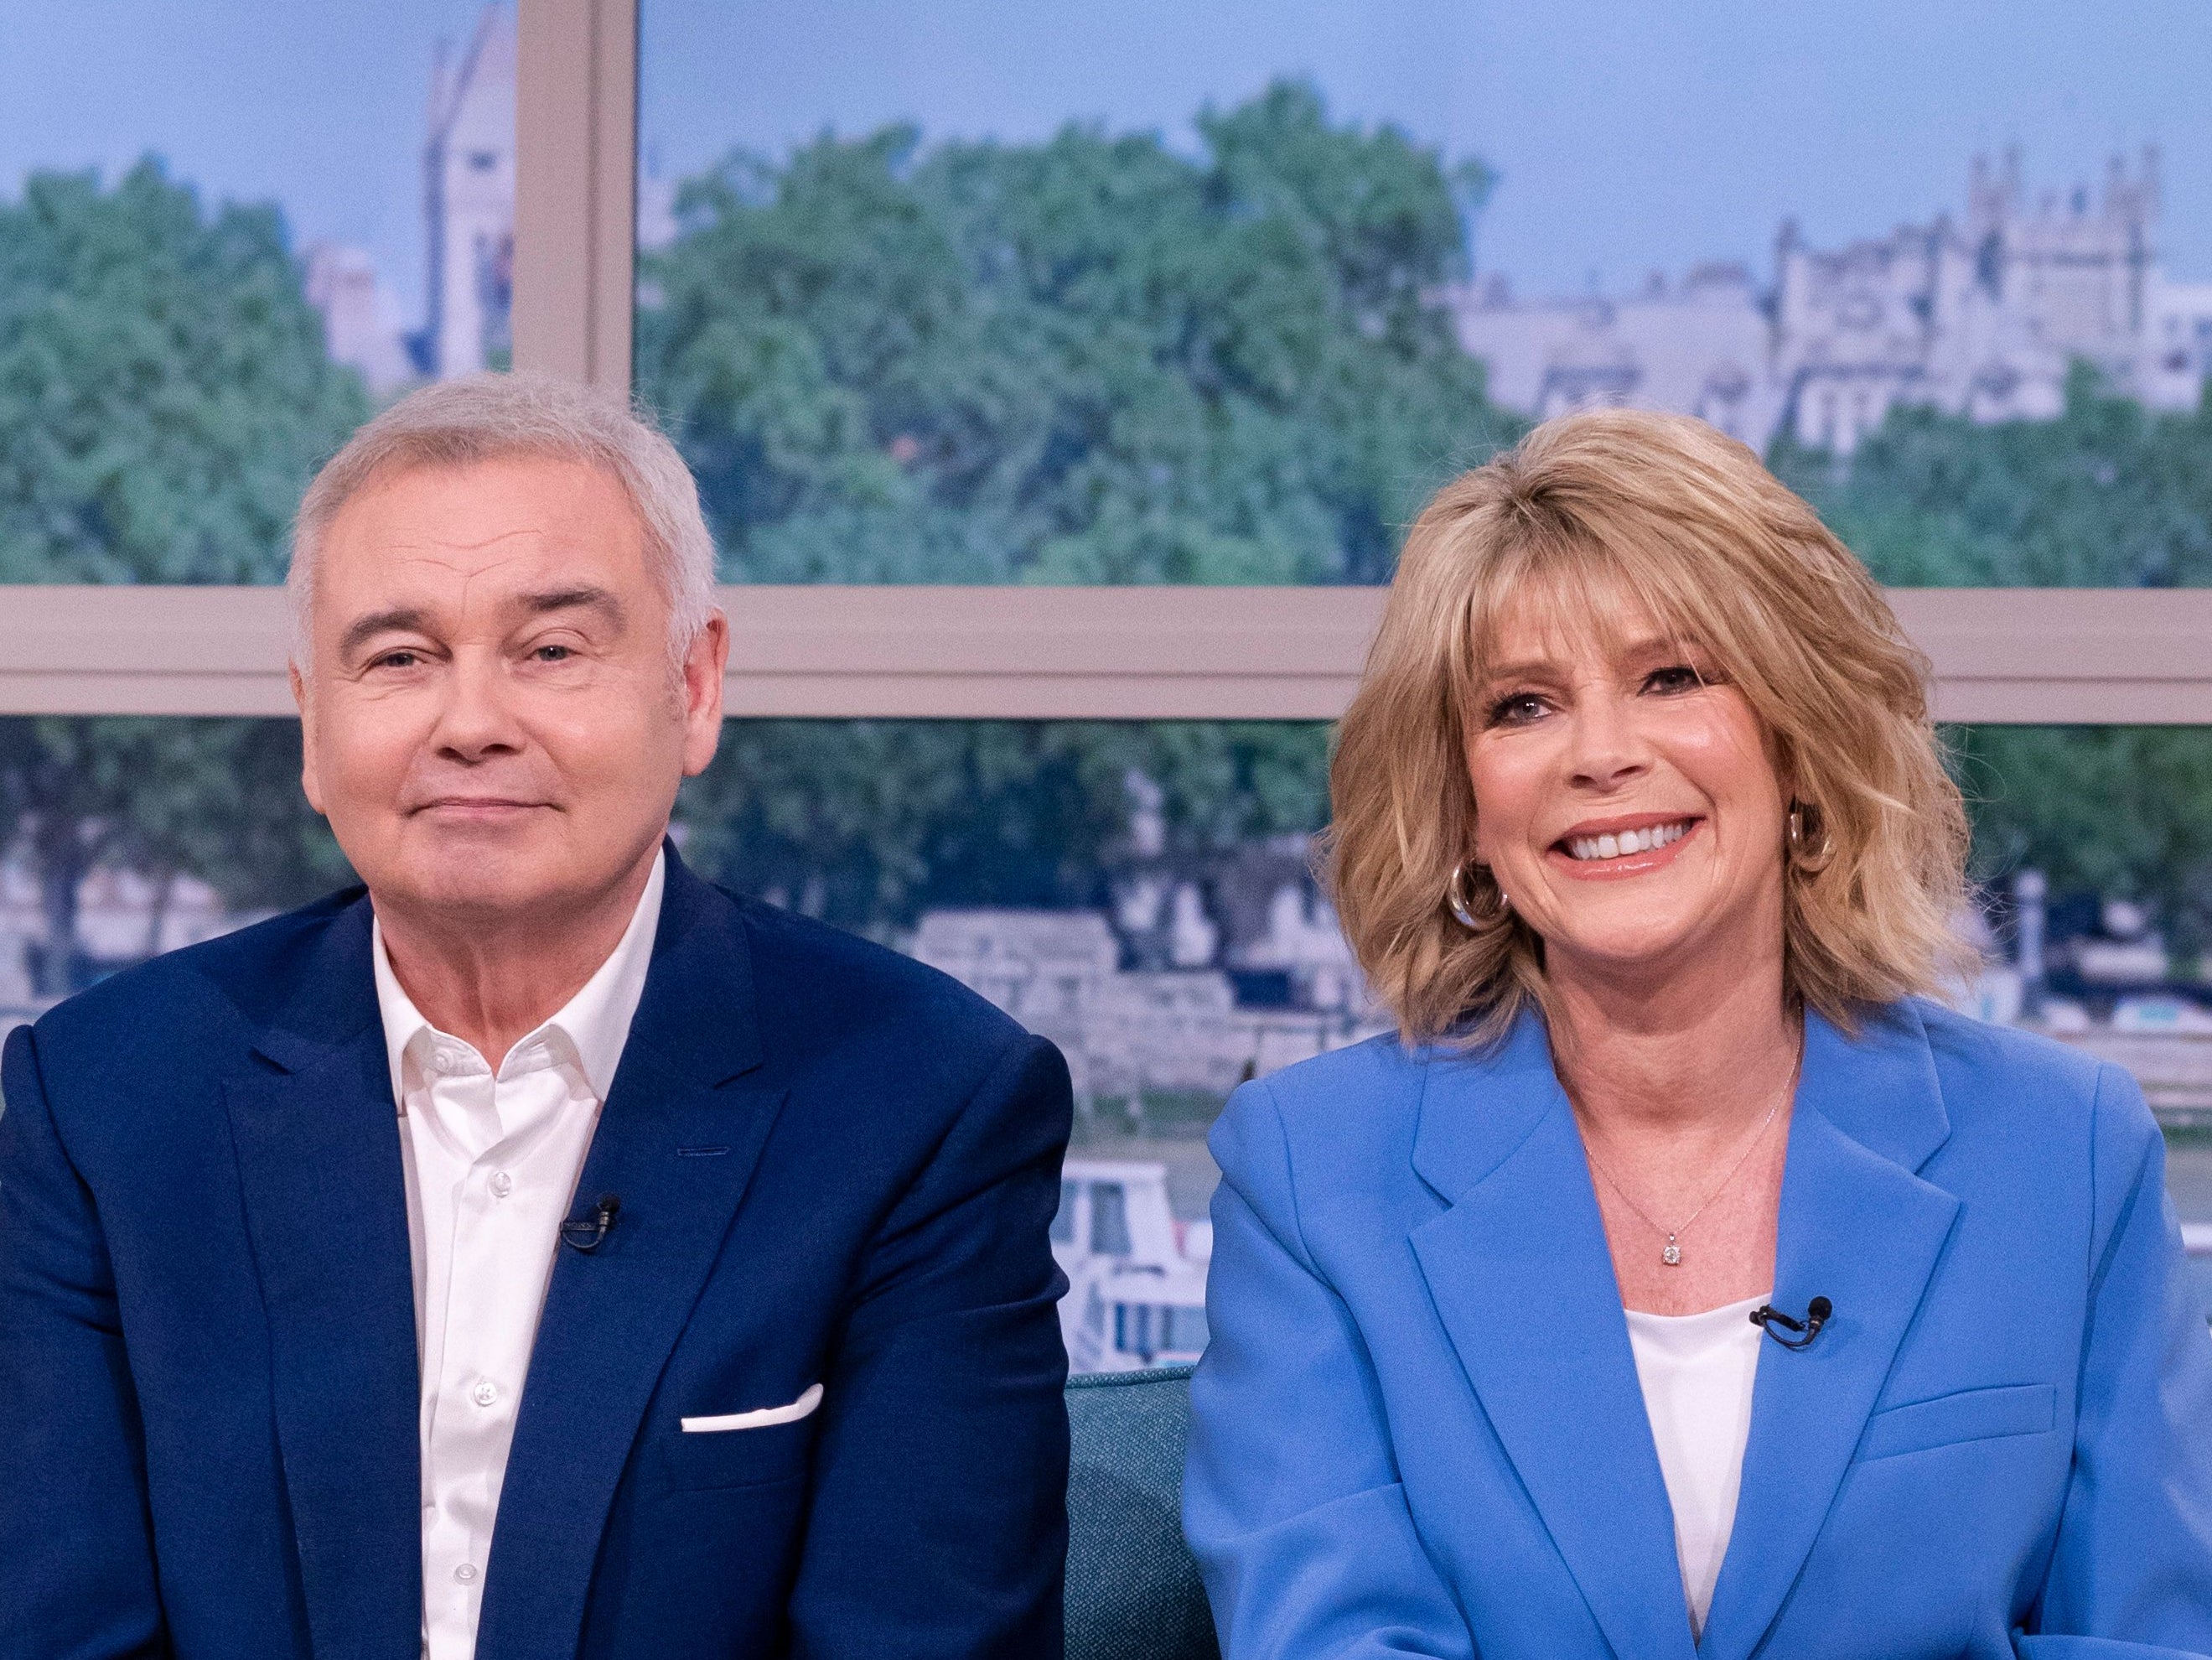 Television presenters Ruth Langsford and Eamonn Holmes have announced their divorce after 14 years of marriage.